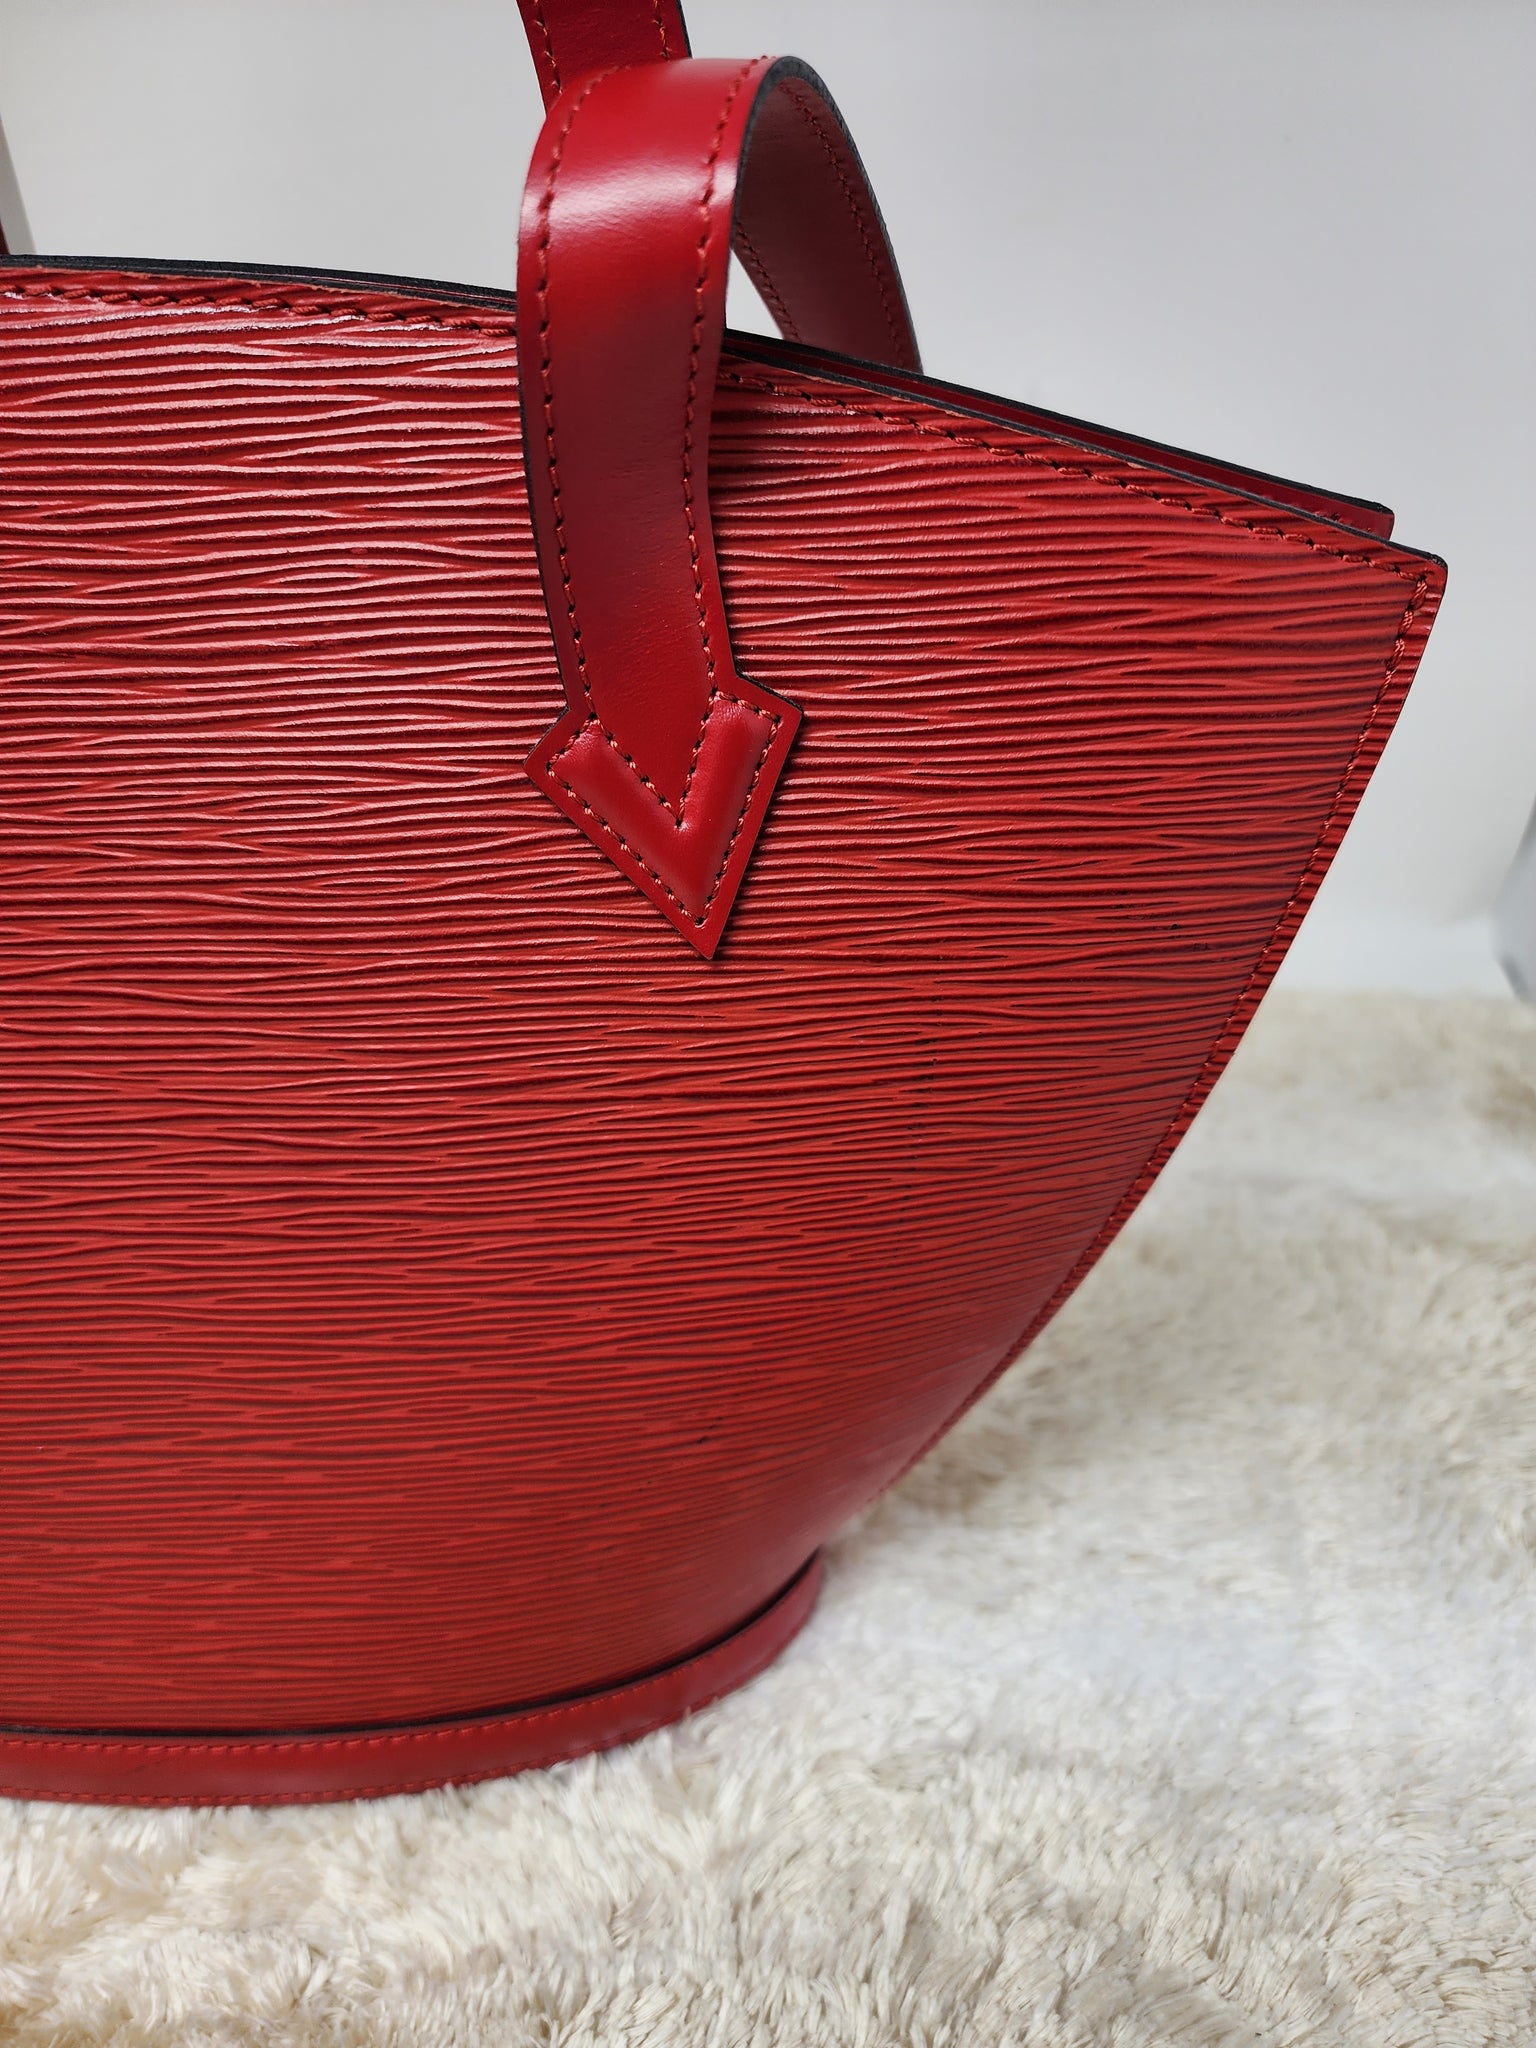 Louis Vuitton Saint Jacques small model handbag in red epi leather